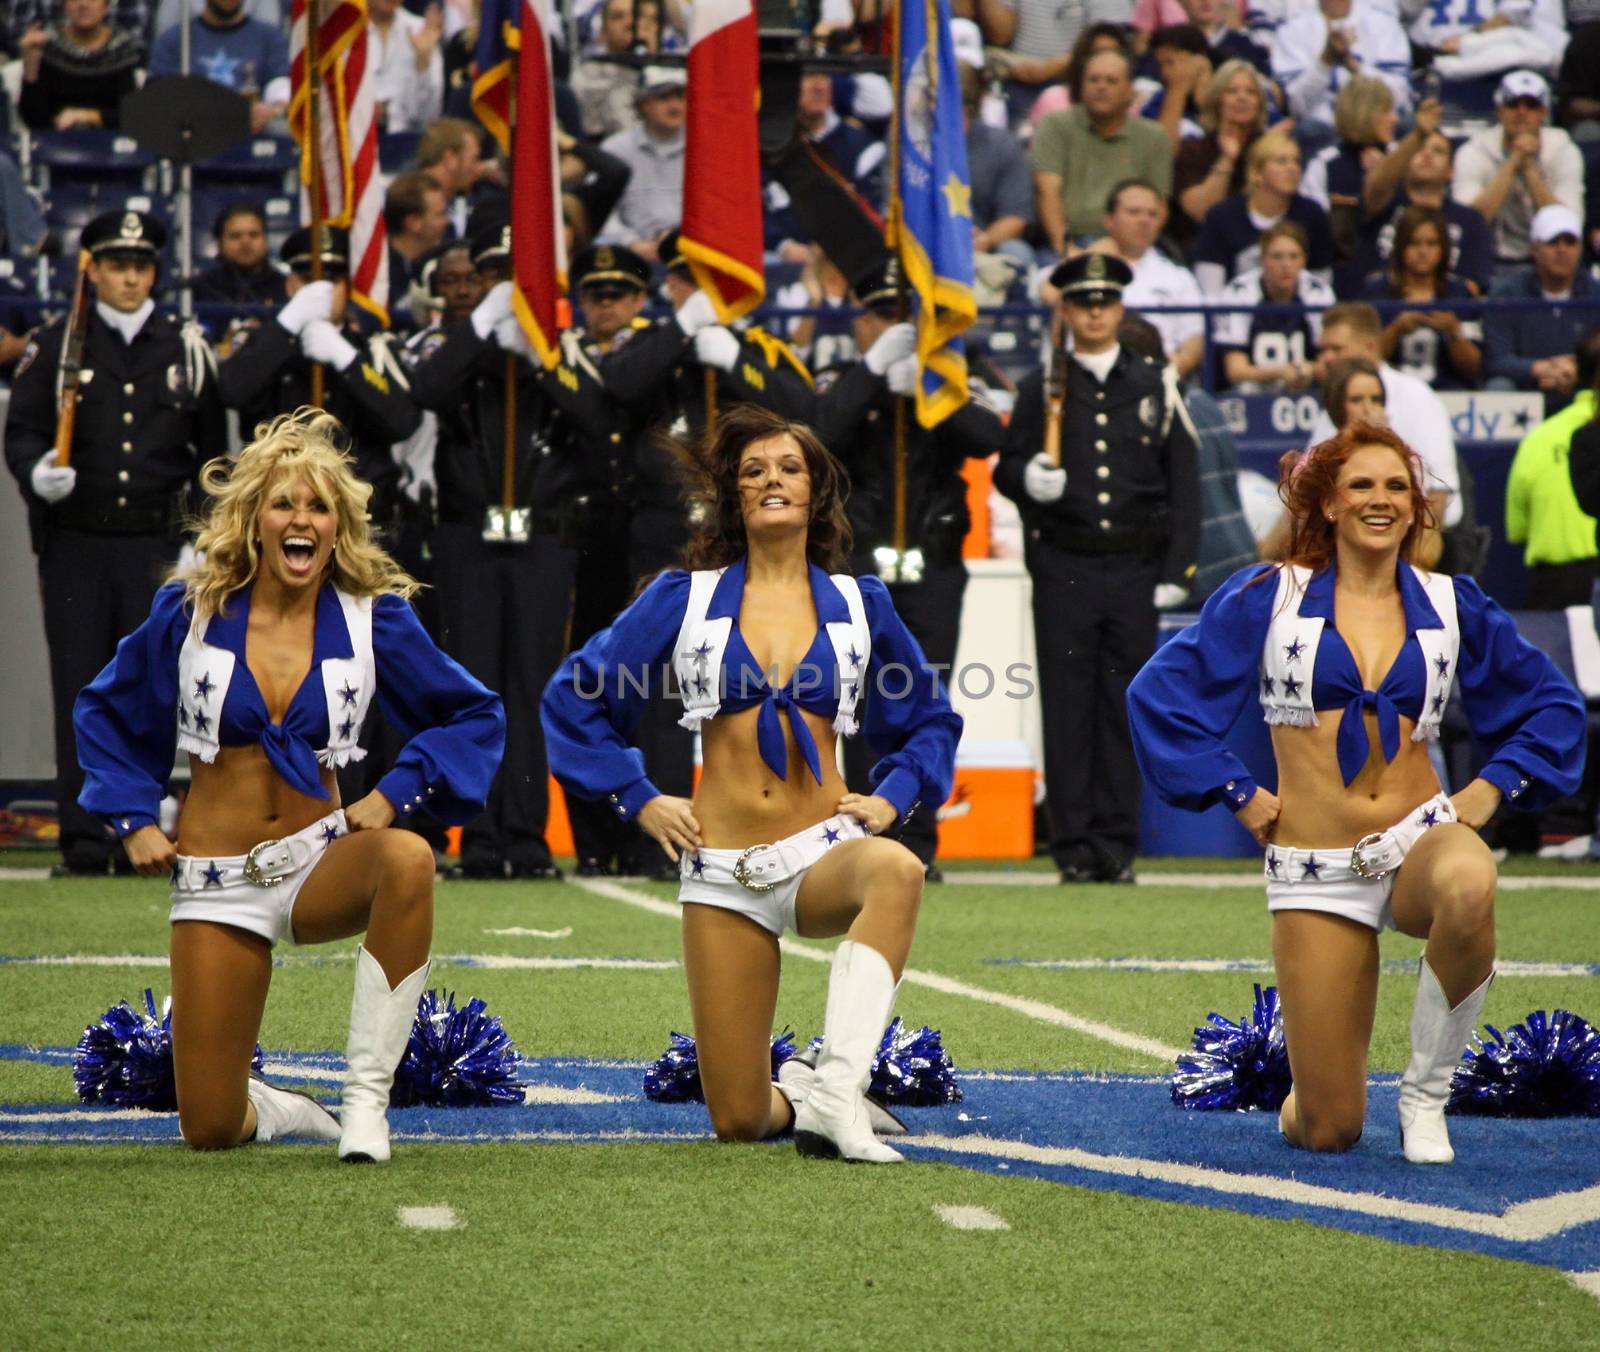 DALLAS - DEC 14: Taken in Texas Stadium on Sunday, December 14, 2008. Dallas Cowboys cheerleaders during pregame activities. Cowboys played the NY Giants.
